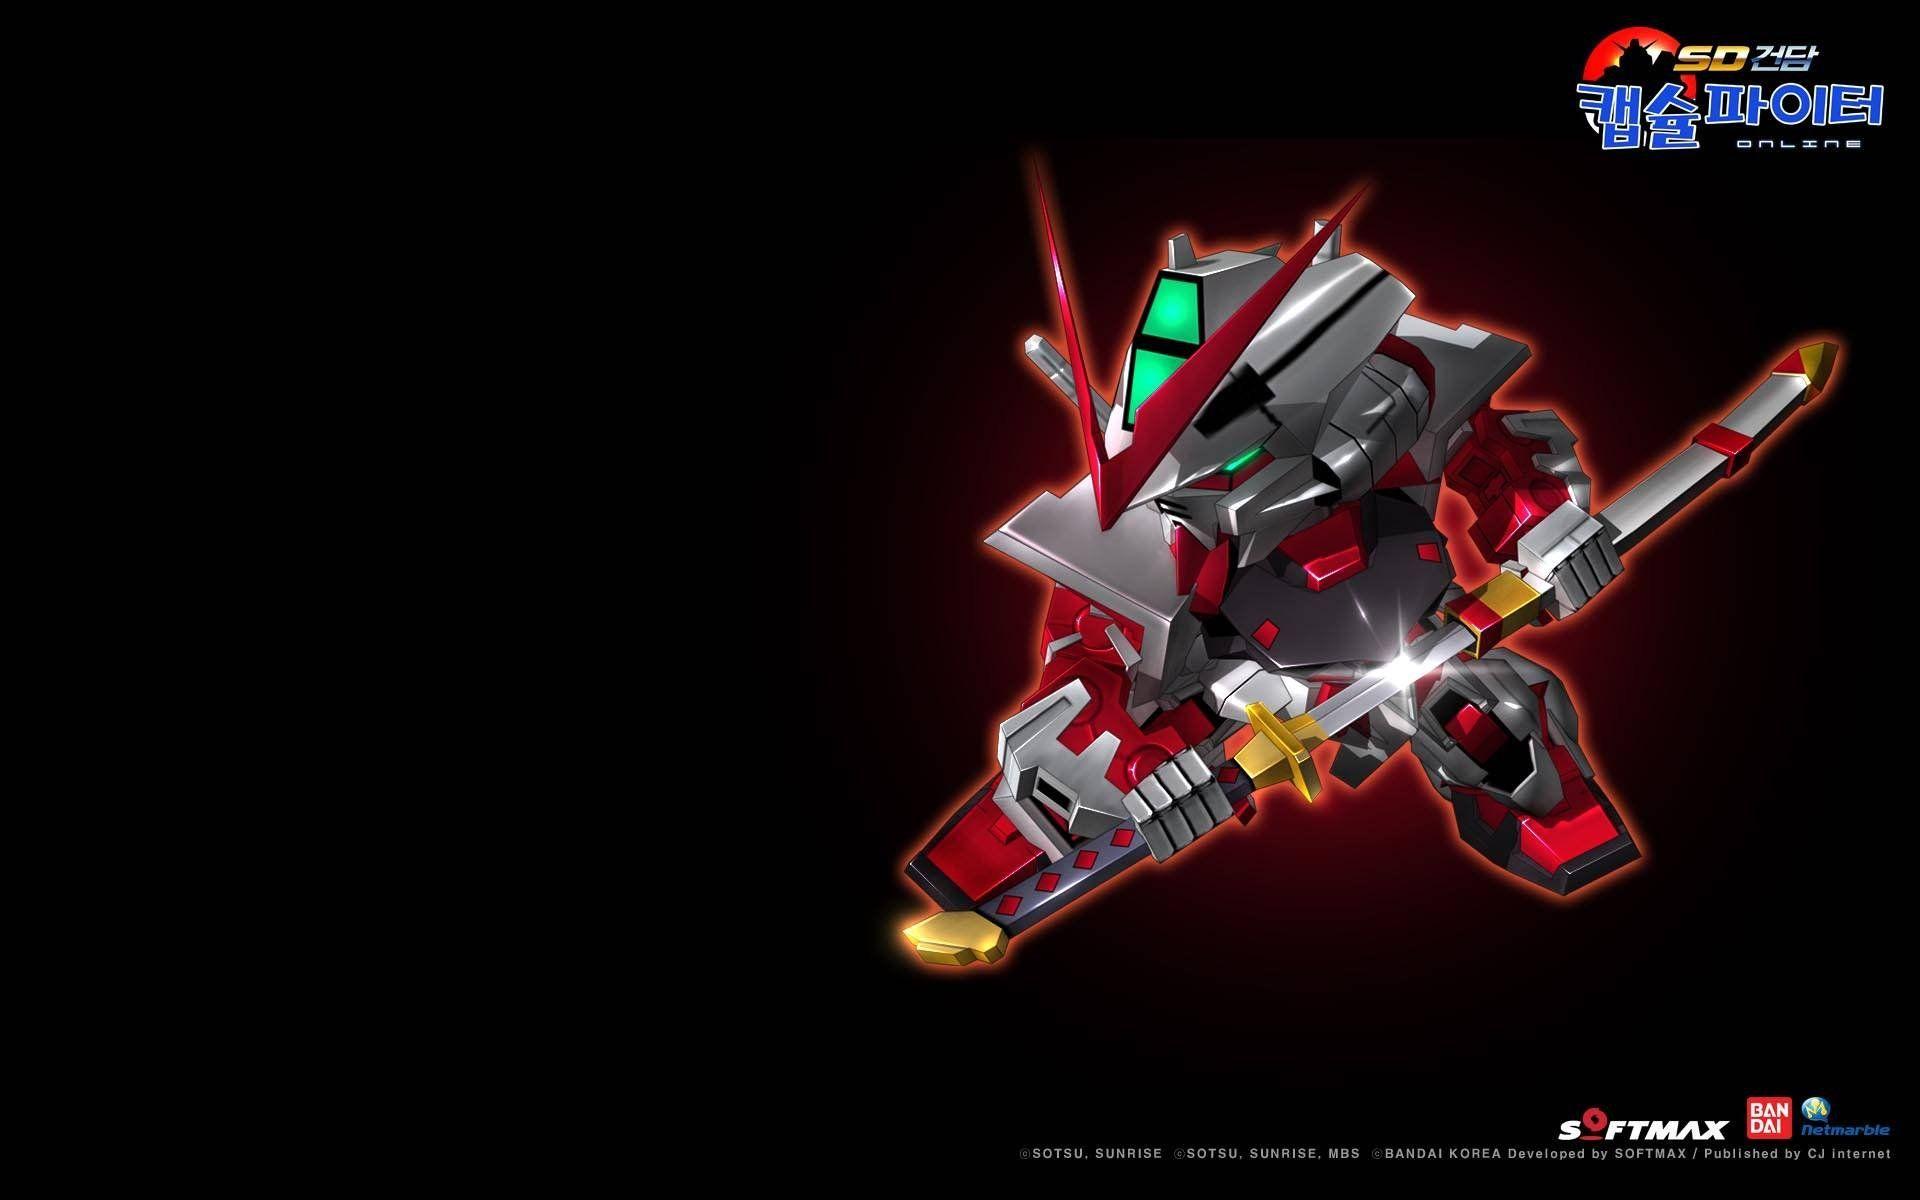 SD Gundam Capsule Fighter Online Sci Fi Shooter Tps Action Mmo